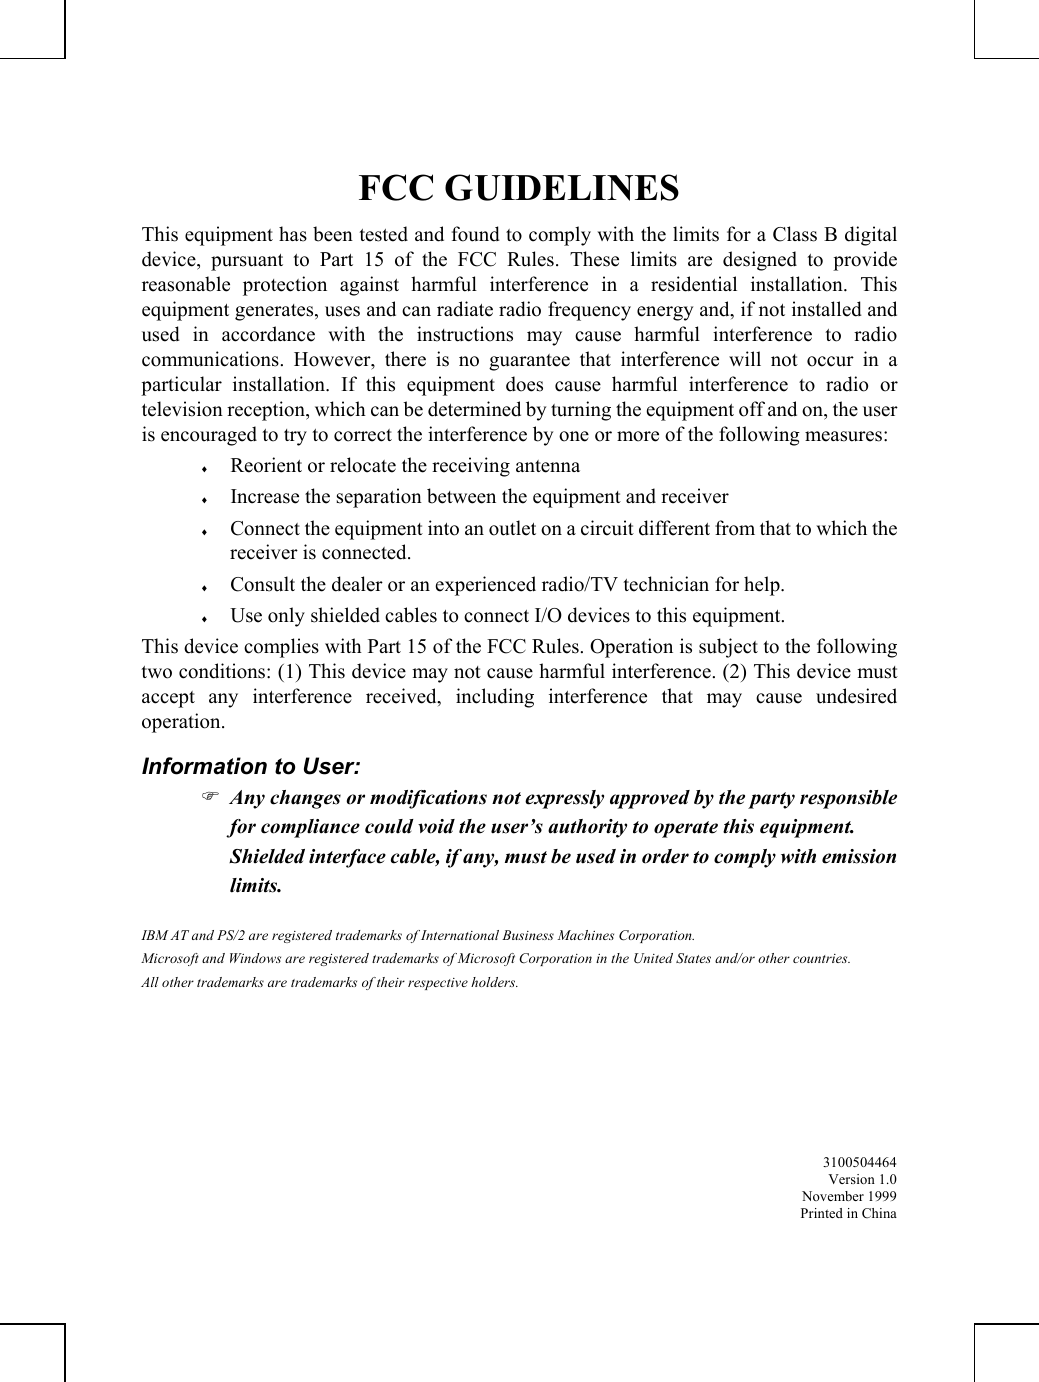 FCC GUIDELINESThis equipment has been tested and found to comply with the limits for a Class B digitaldevice, pursuant to Part 15 of the FCC Rules. These limits are designed to providereasonable protection against harmful interference in a residential installation. Thisequipment generates, uses and can radiate radio frequency energy and, if not installed andused in accordance with the instructions may cause harmful interference to radiocommunications. However, there is no guarantee that interference will not occur in aparticular installation. If this equipment does cause harmful interference to radio ortelevision reception, which can be determined by turning the equipment off and on, the useris encouraged to try to correct the interference by one or more of the following measures:♦ Reorient or relocate the receiving antenna♦ Increase the separation between the equipment and receiver♦ Connect the equipment into an outlet on a circuit different from that to which thereceiver is connected.♦ Consult the dealer or an experienced radio/TV technician for help.♦ Use only shielded cables to connect I/O devices to this equipment.This device complies with Part 15 of the FCC Rules. Operation is subject to the followingtwo conditions: (1) This device may not cause harmful interference. (2) This device mustaccept any interference received, including interference that may cause undesiredoperation.Information to User:) Any changes or modifications not expressly approved by the party responsiblefor compliance could void the user’s authority to operate this equipment.Shielded interface cable, if any, must be used in order to comply with emissionlimits.IBM AT and PS/2 are registered trademarks of International Business Machines Corporation.Microsoft and Windows are registered trademarks of Microsoft Corporation in the United States and/or other countries.All other trademarks are trademarks of their respective holders.3100504464Version 1.0November 1999Printed in China